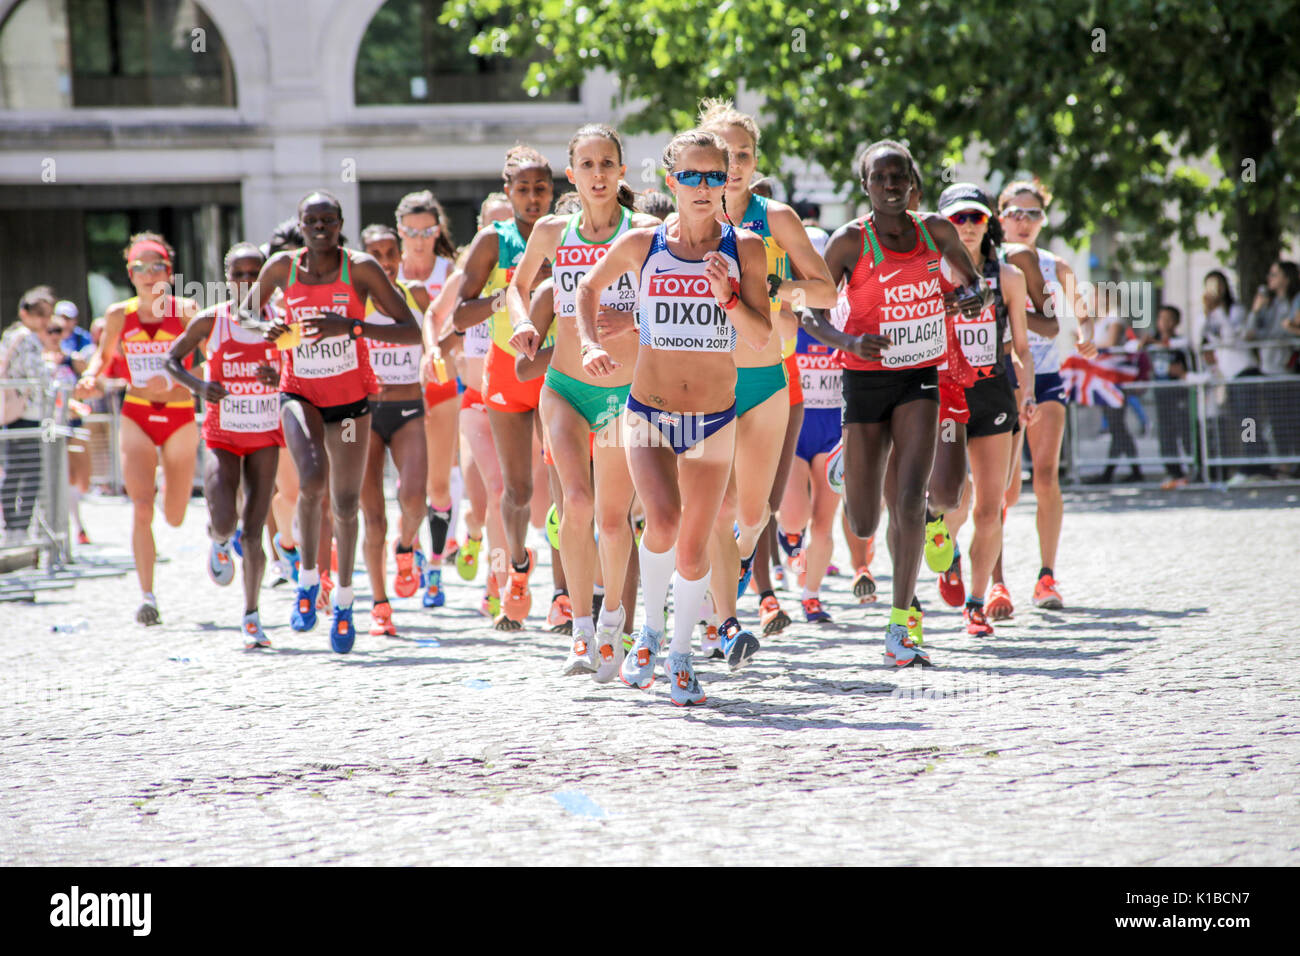 6 August 2017, London: Alyson Dixon (GBR) leads the race early in the IAAF World Championships Women's Marathon 2017 Stock Photo